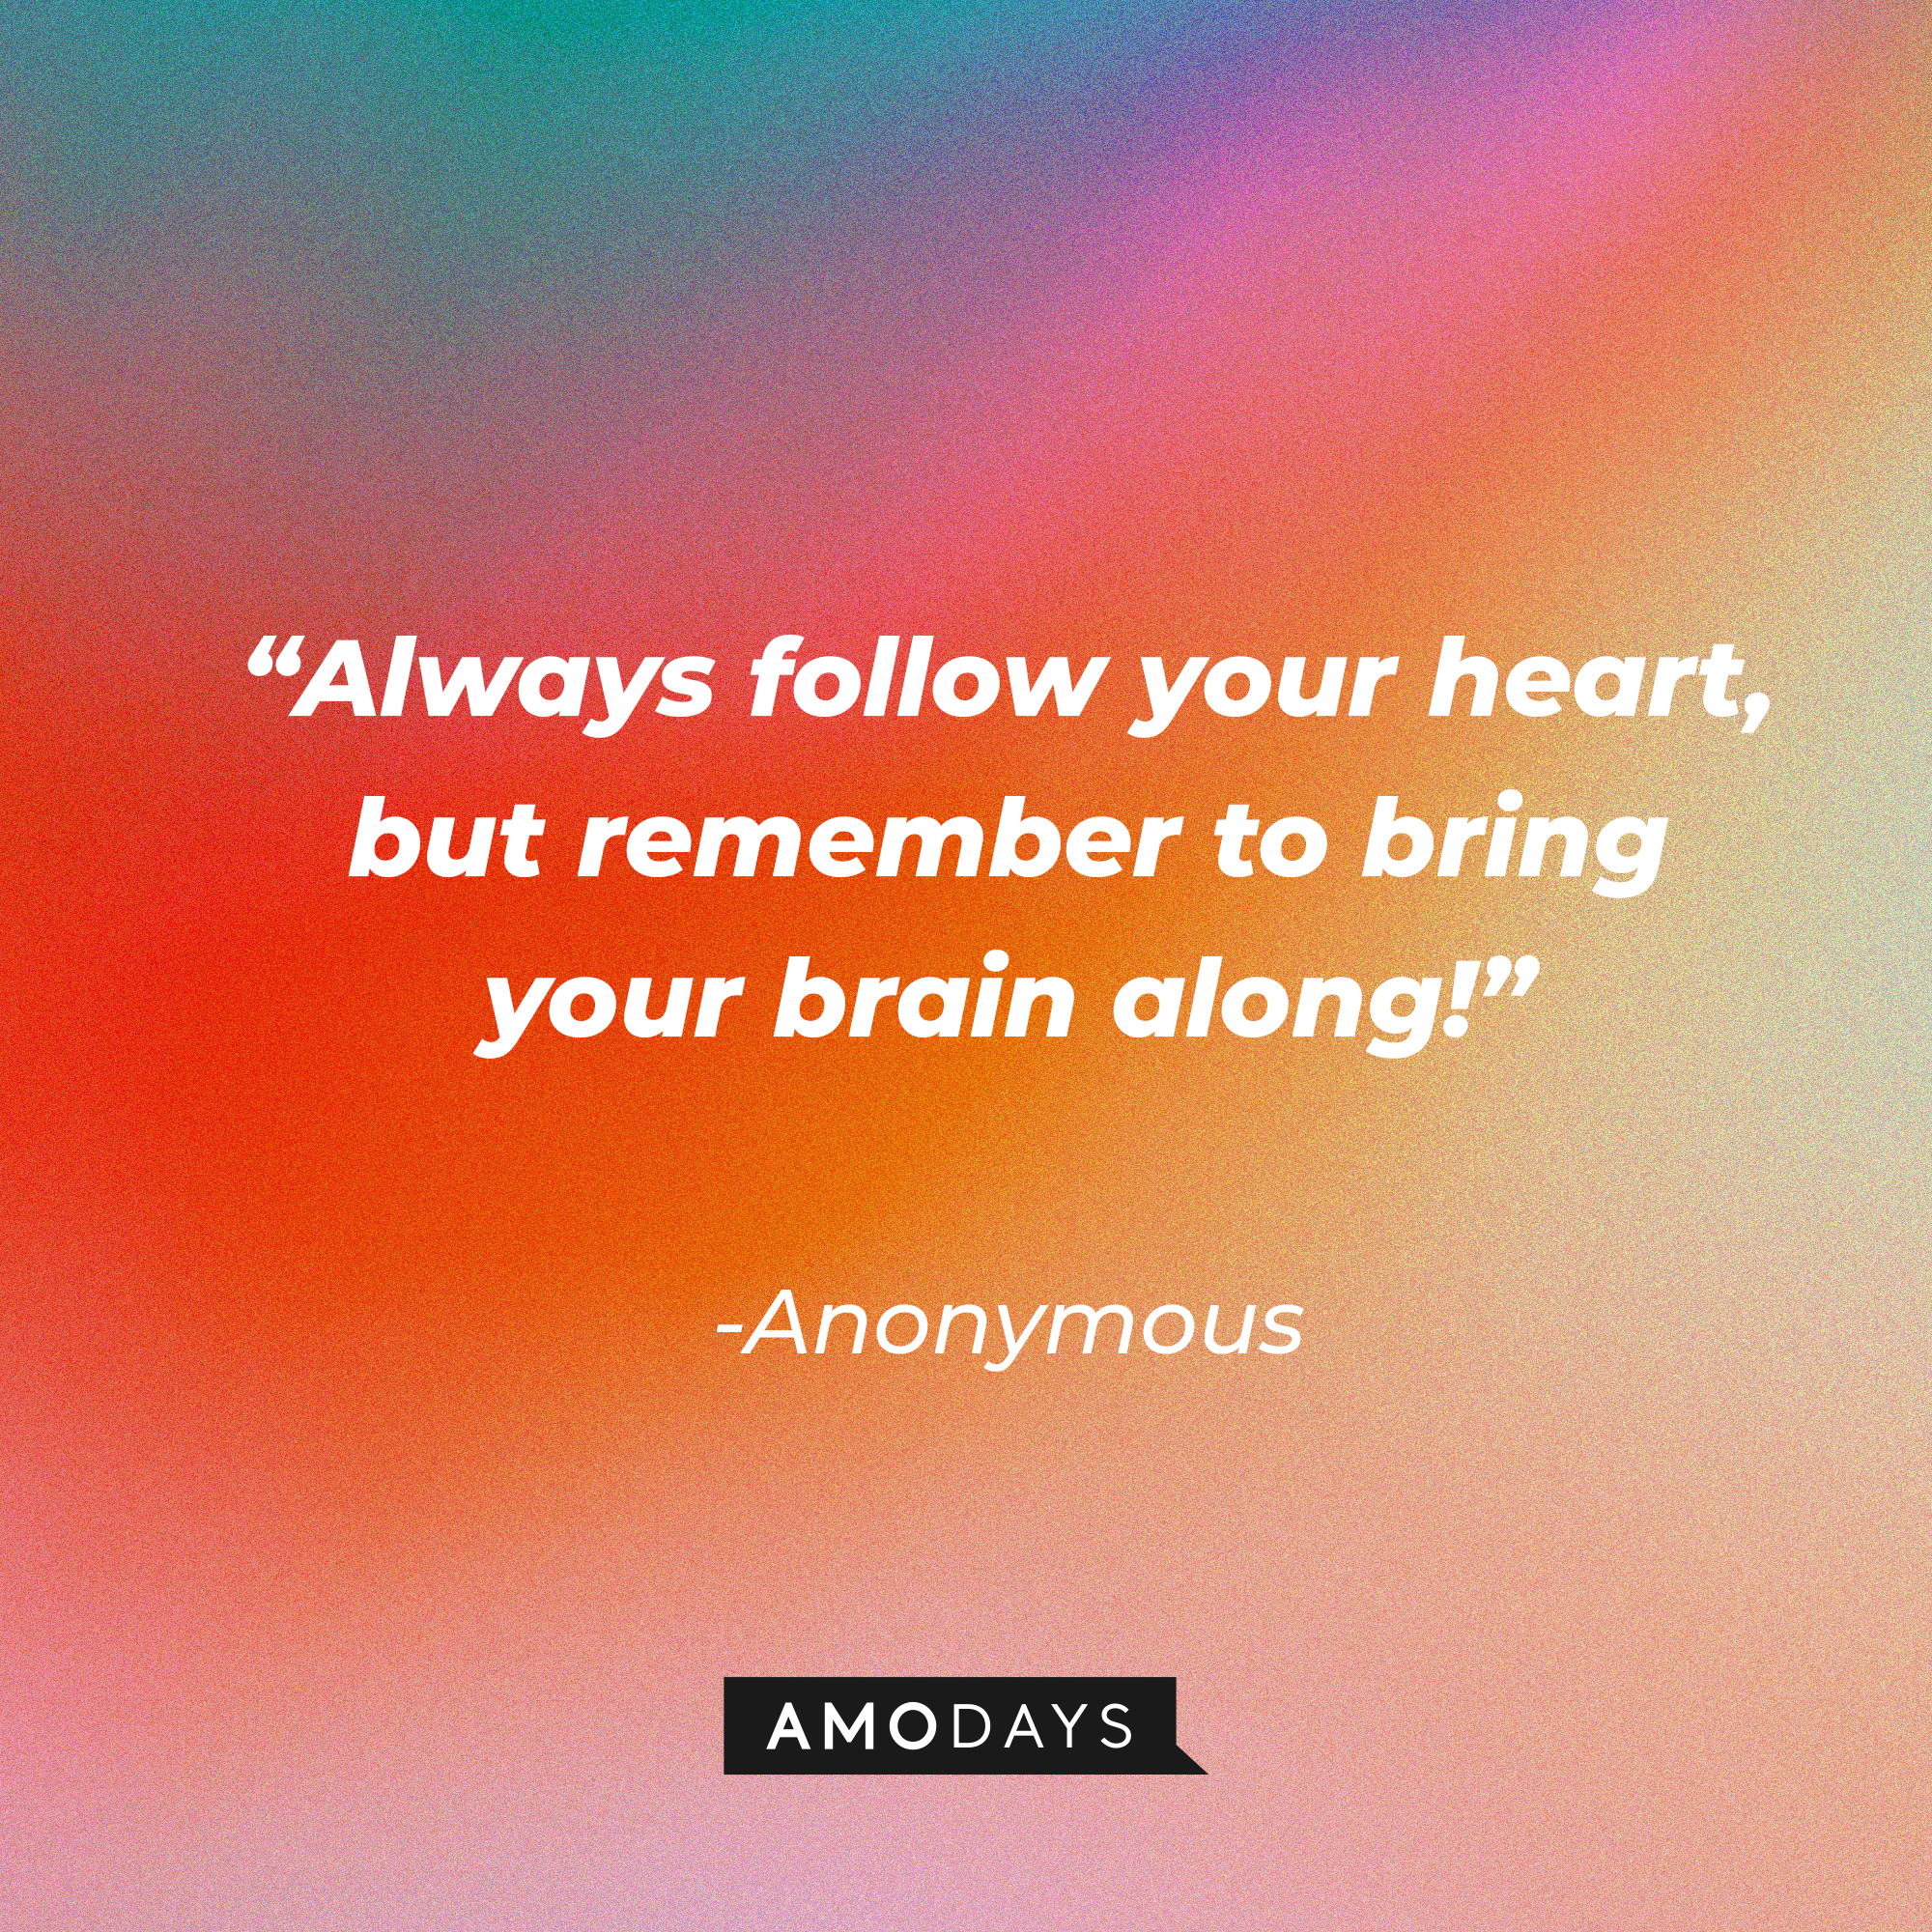 Anonymous quote: “Always follow your heart, but remember to bring your brain along!” | Source: Amodays